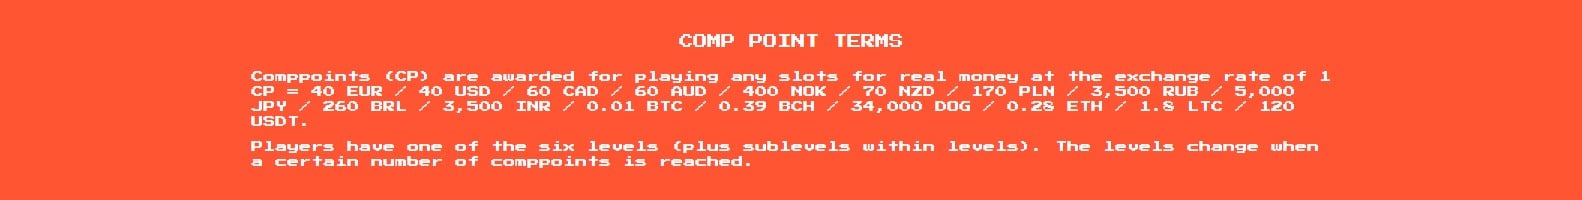 Comp point terms